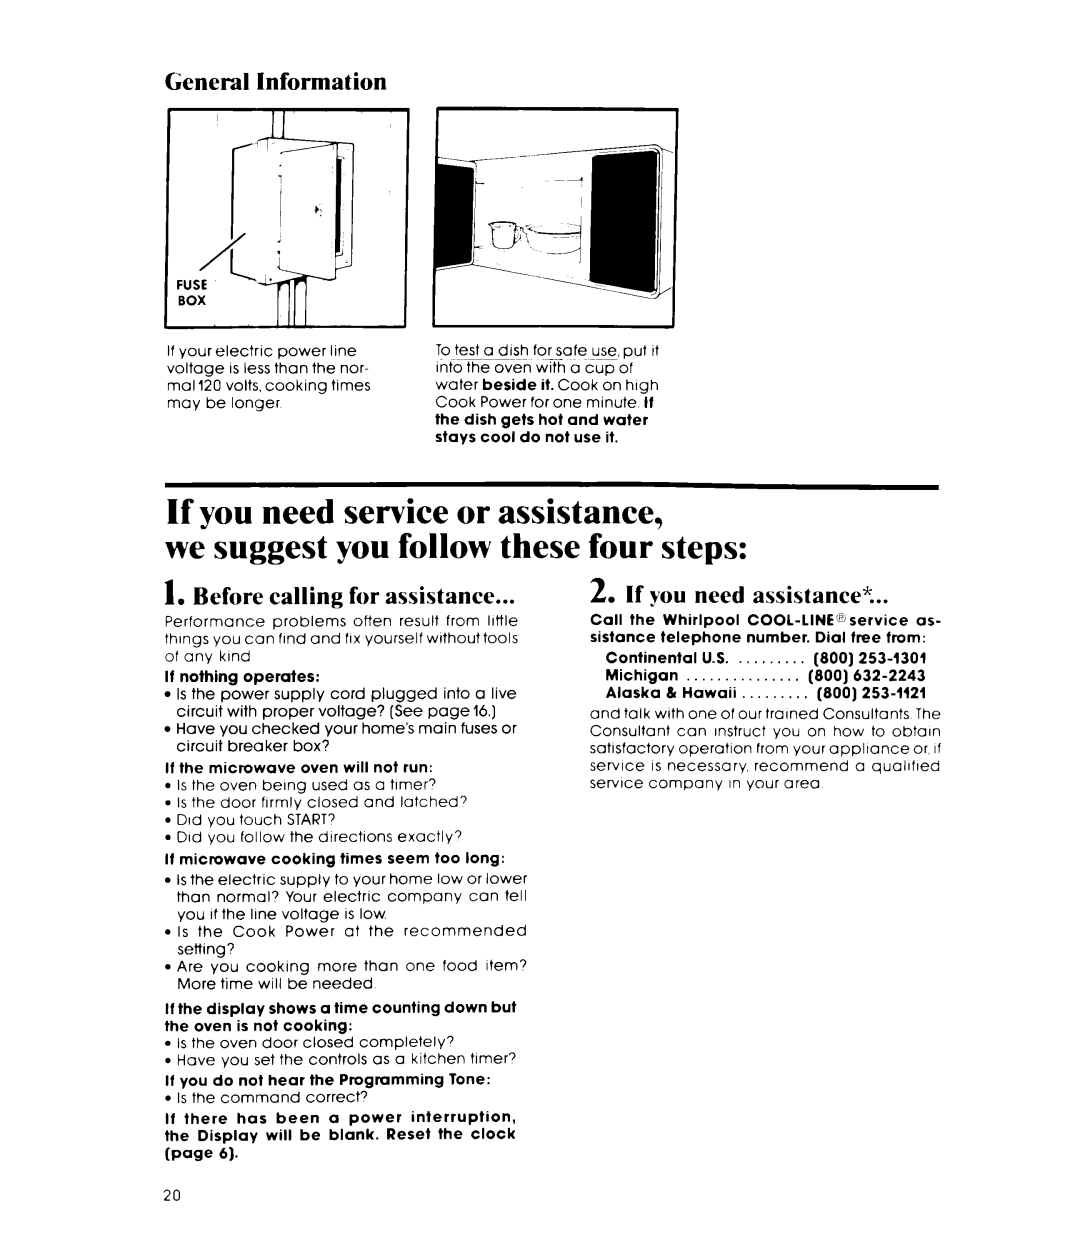 Whirlpool 252, MW3500XP If you need service or assistance, we suggest you follow these four steps, General Information 